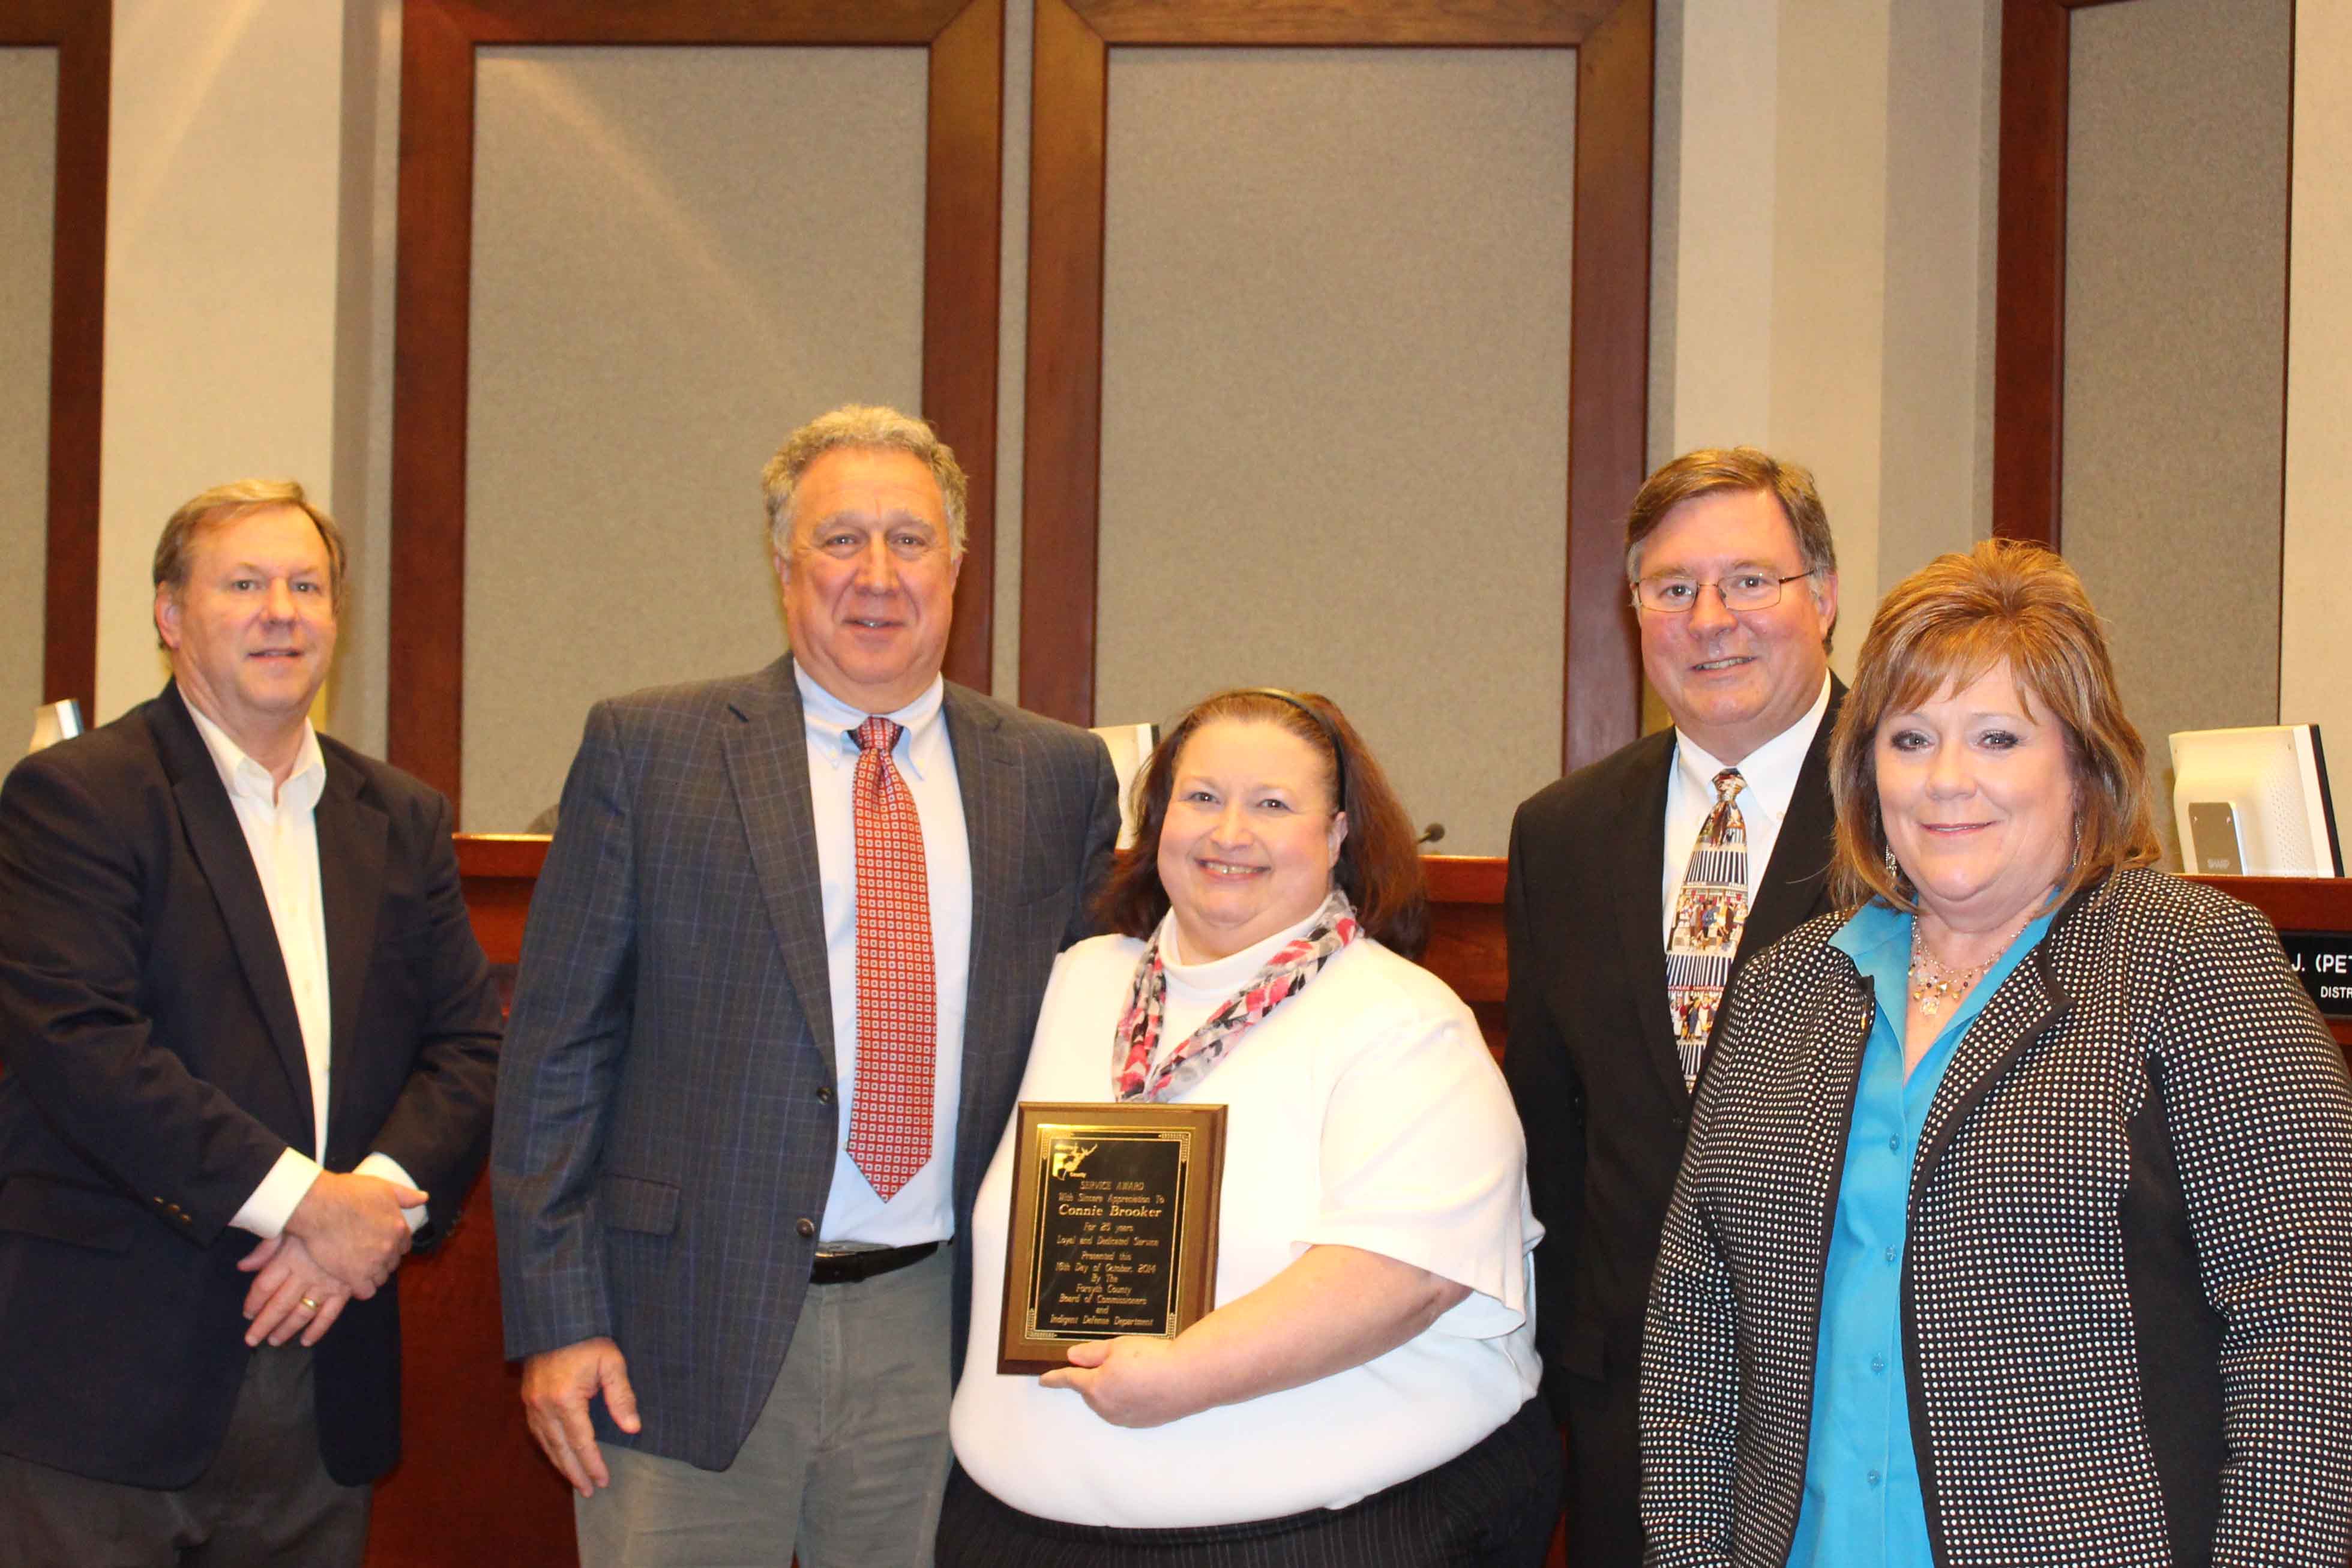 Forsyth County Employee Recognized for 25 Years of Service